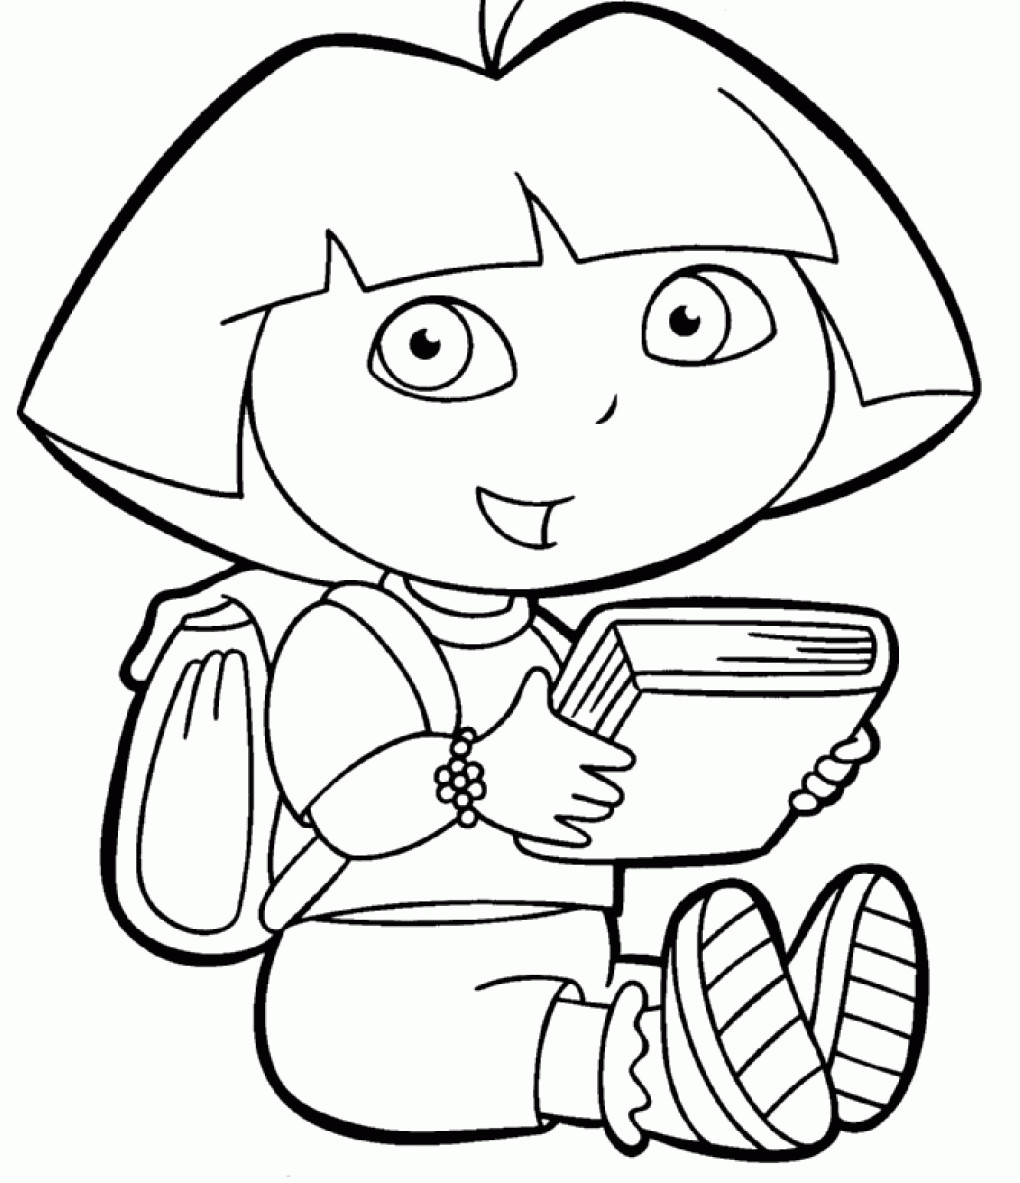 Dora Printable Coloring Pages
 dora the explorer coloring pages